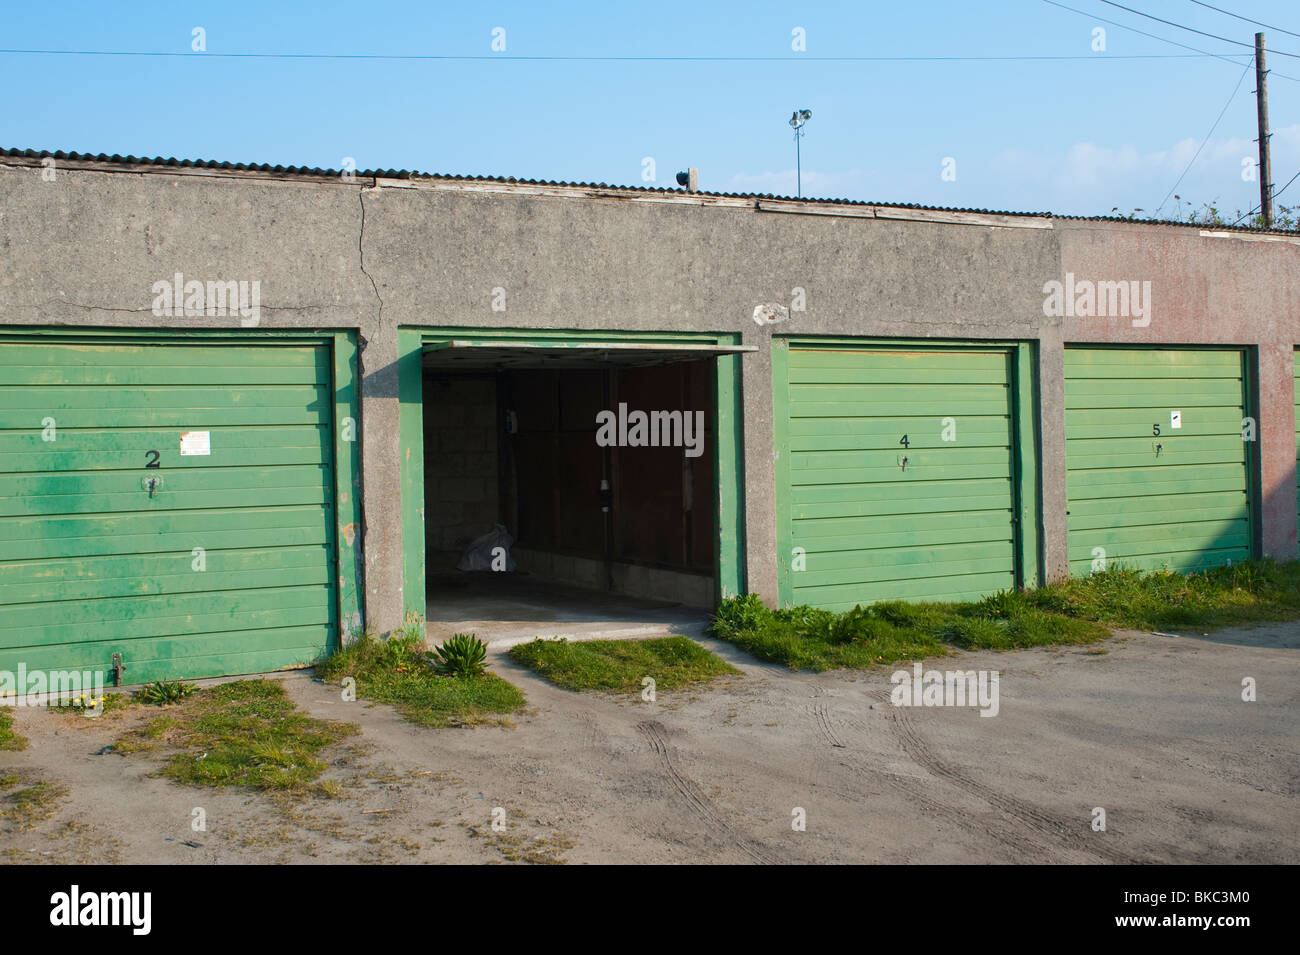 A row of garages. Stock Photo